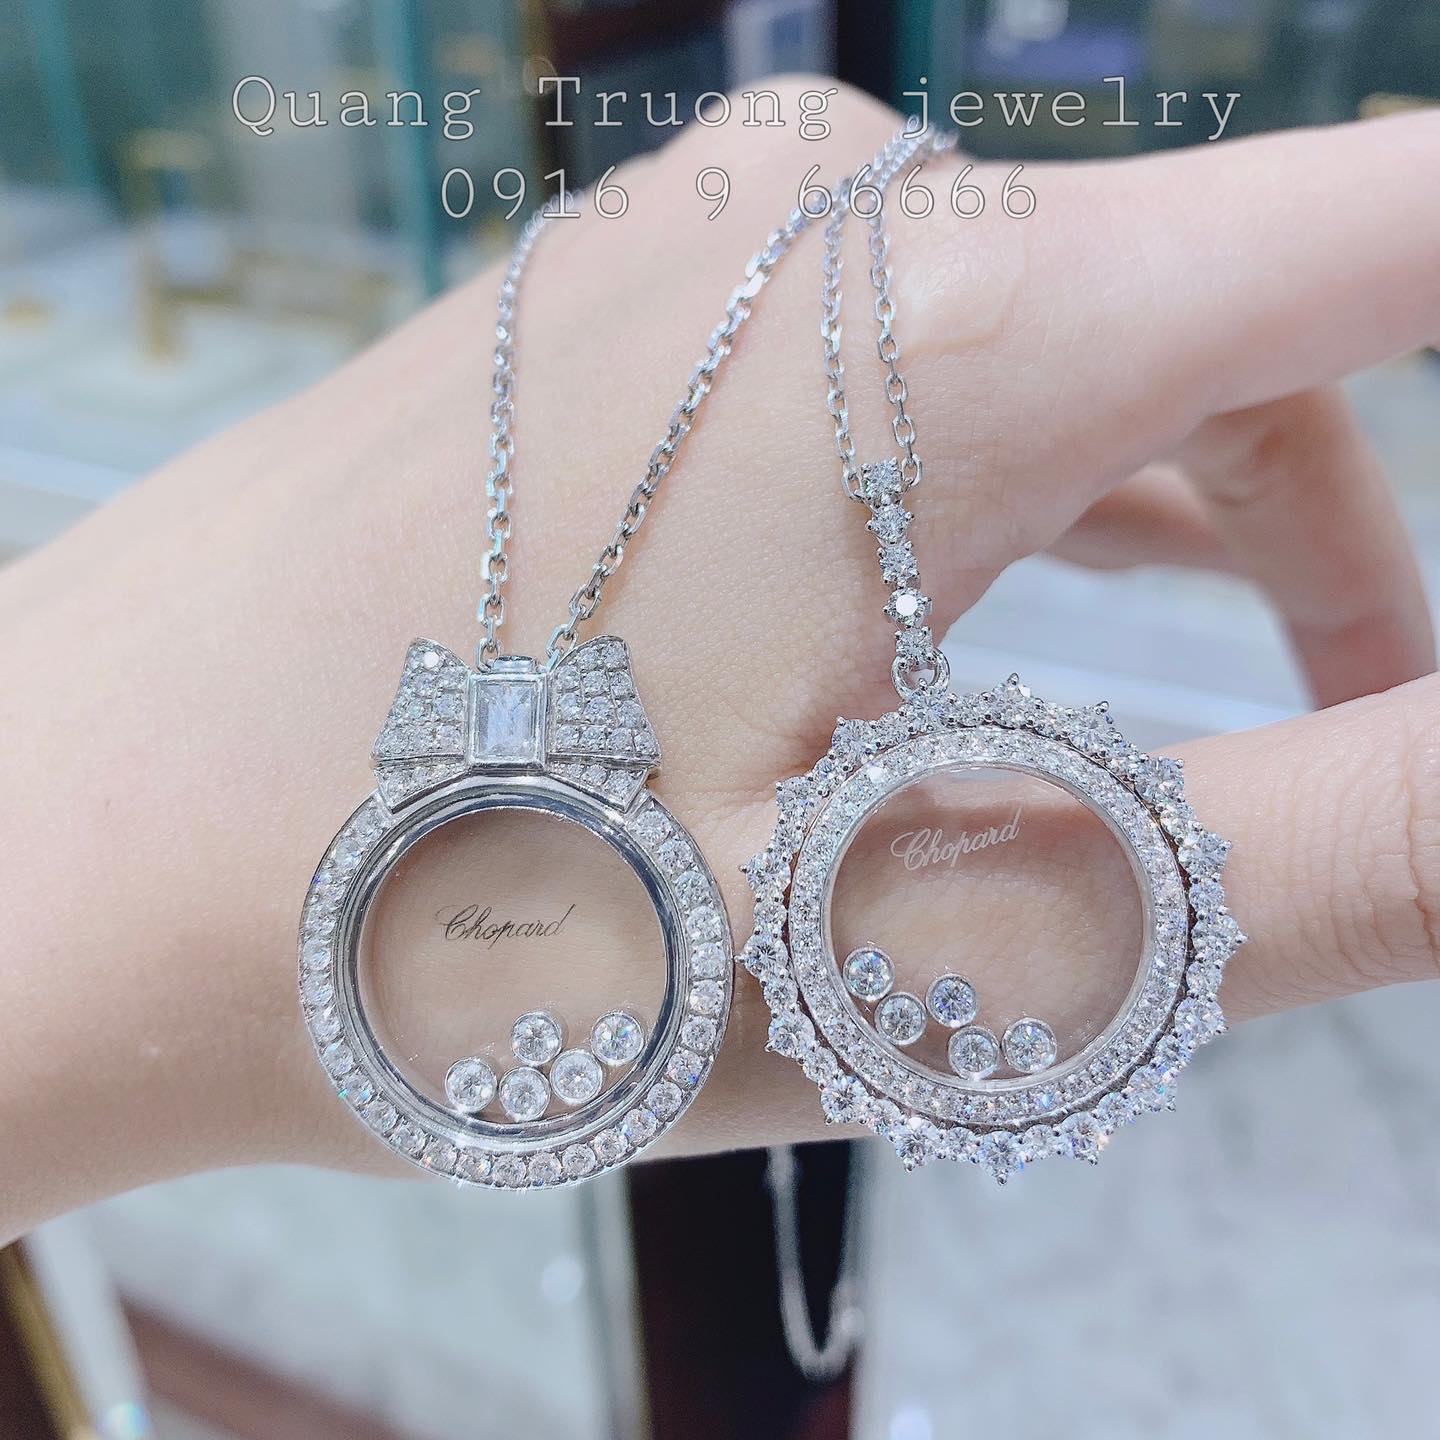 Quang Truong Jewelry ảnh 1